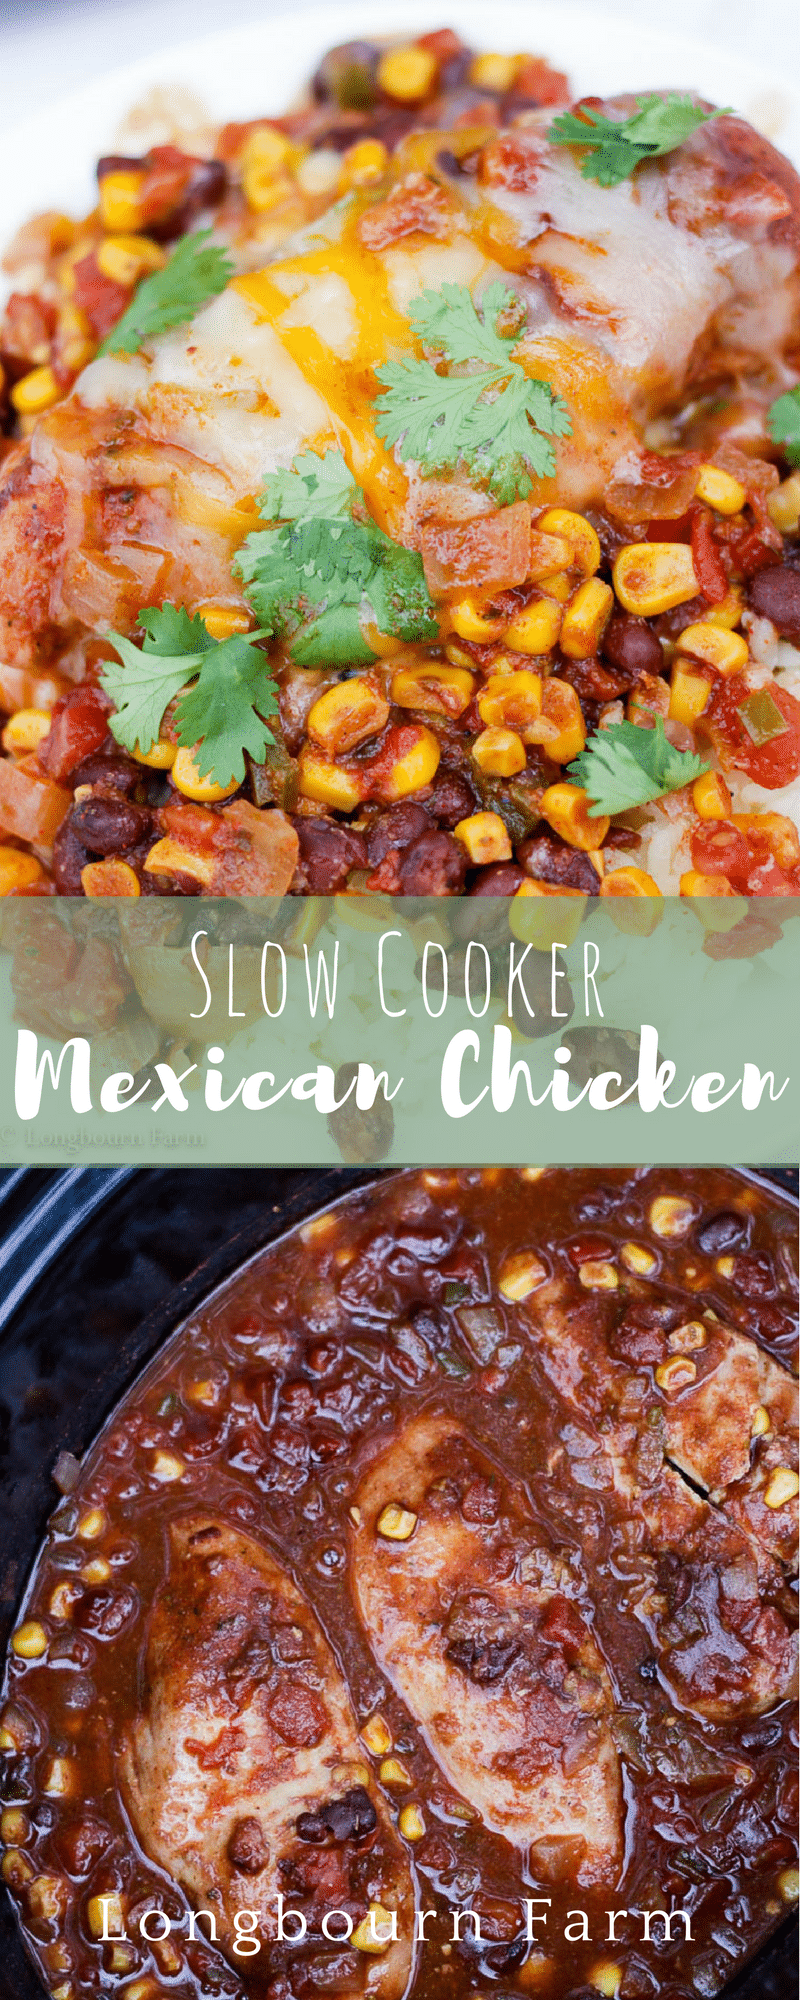 Slow cooker mexican chicken is delicious, packed with flavor and easy to make! Serve it over rice, quinoa, or even in a taco salad! Instant Family Favorite!